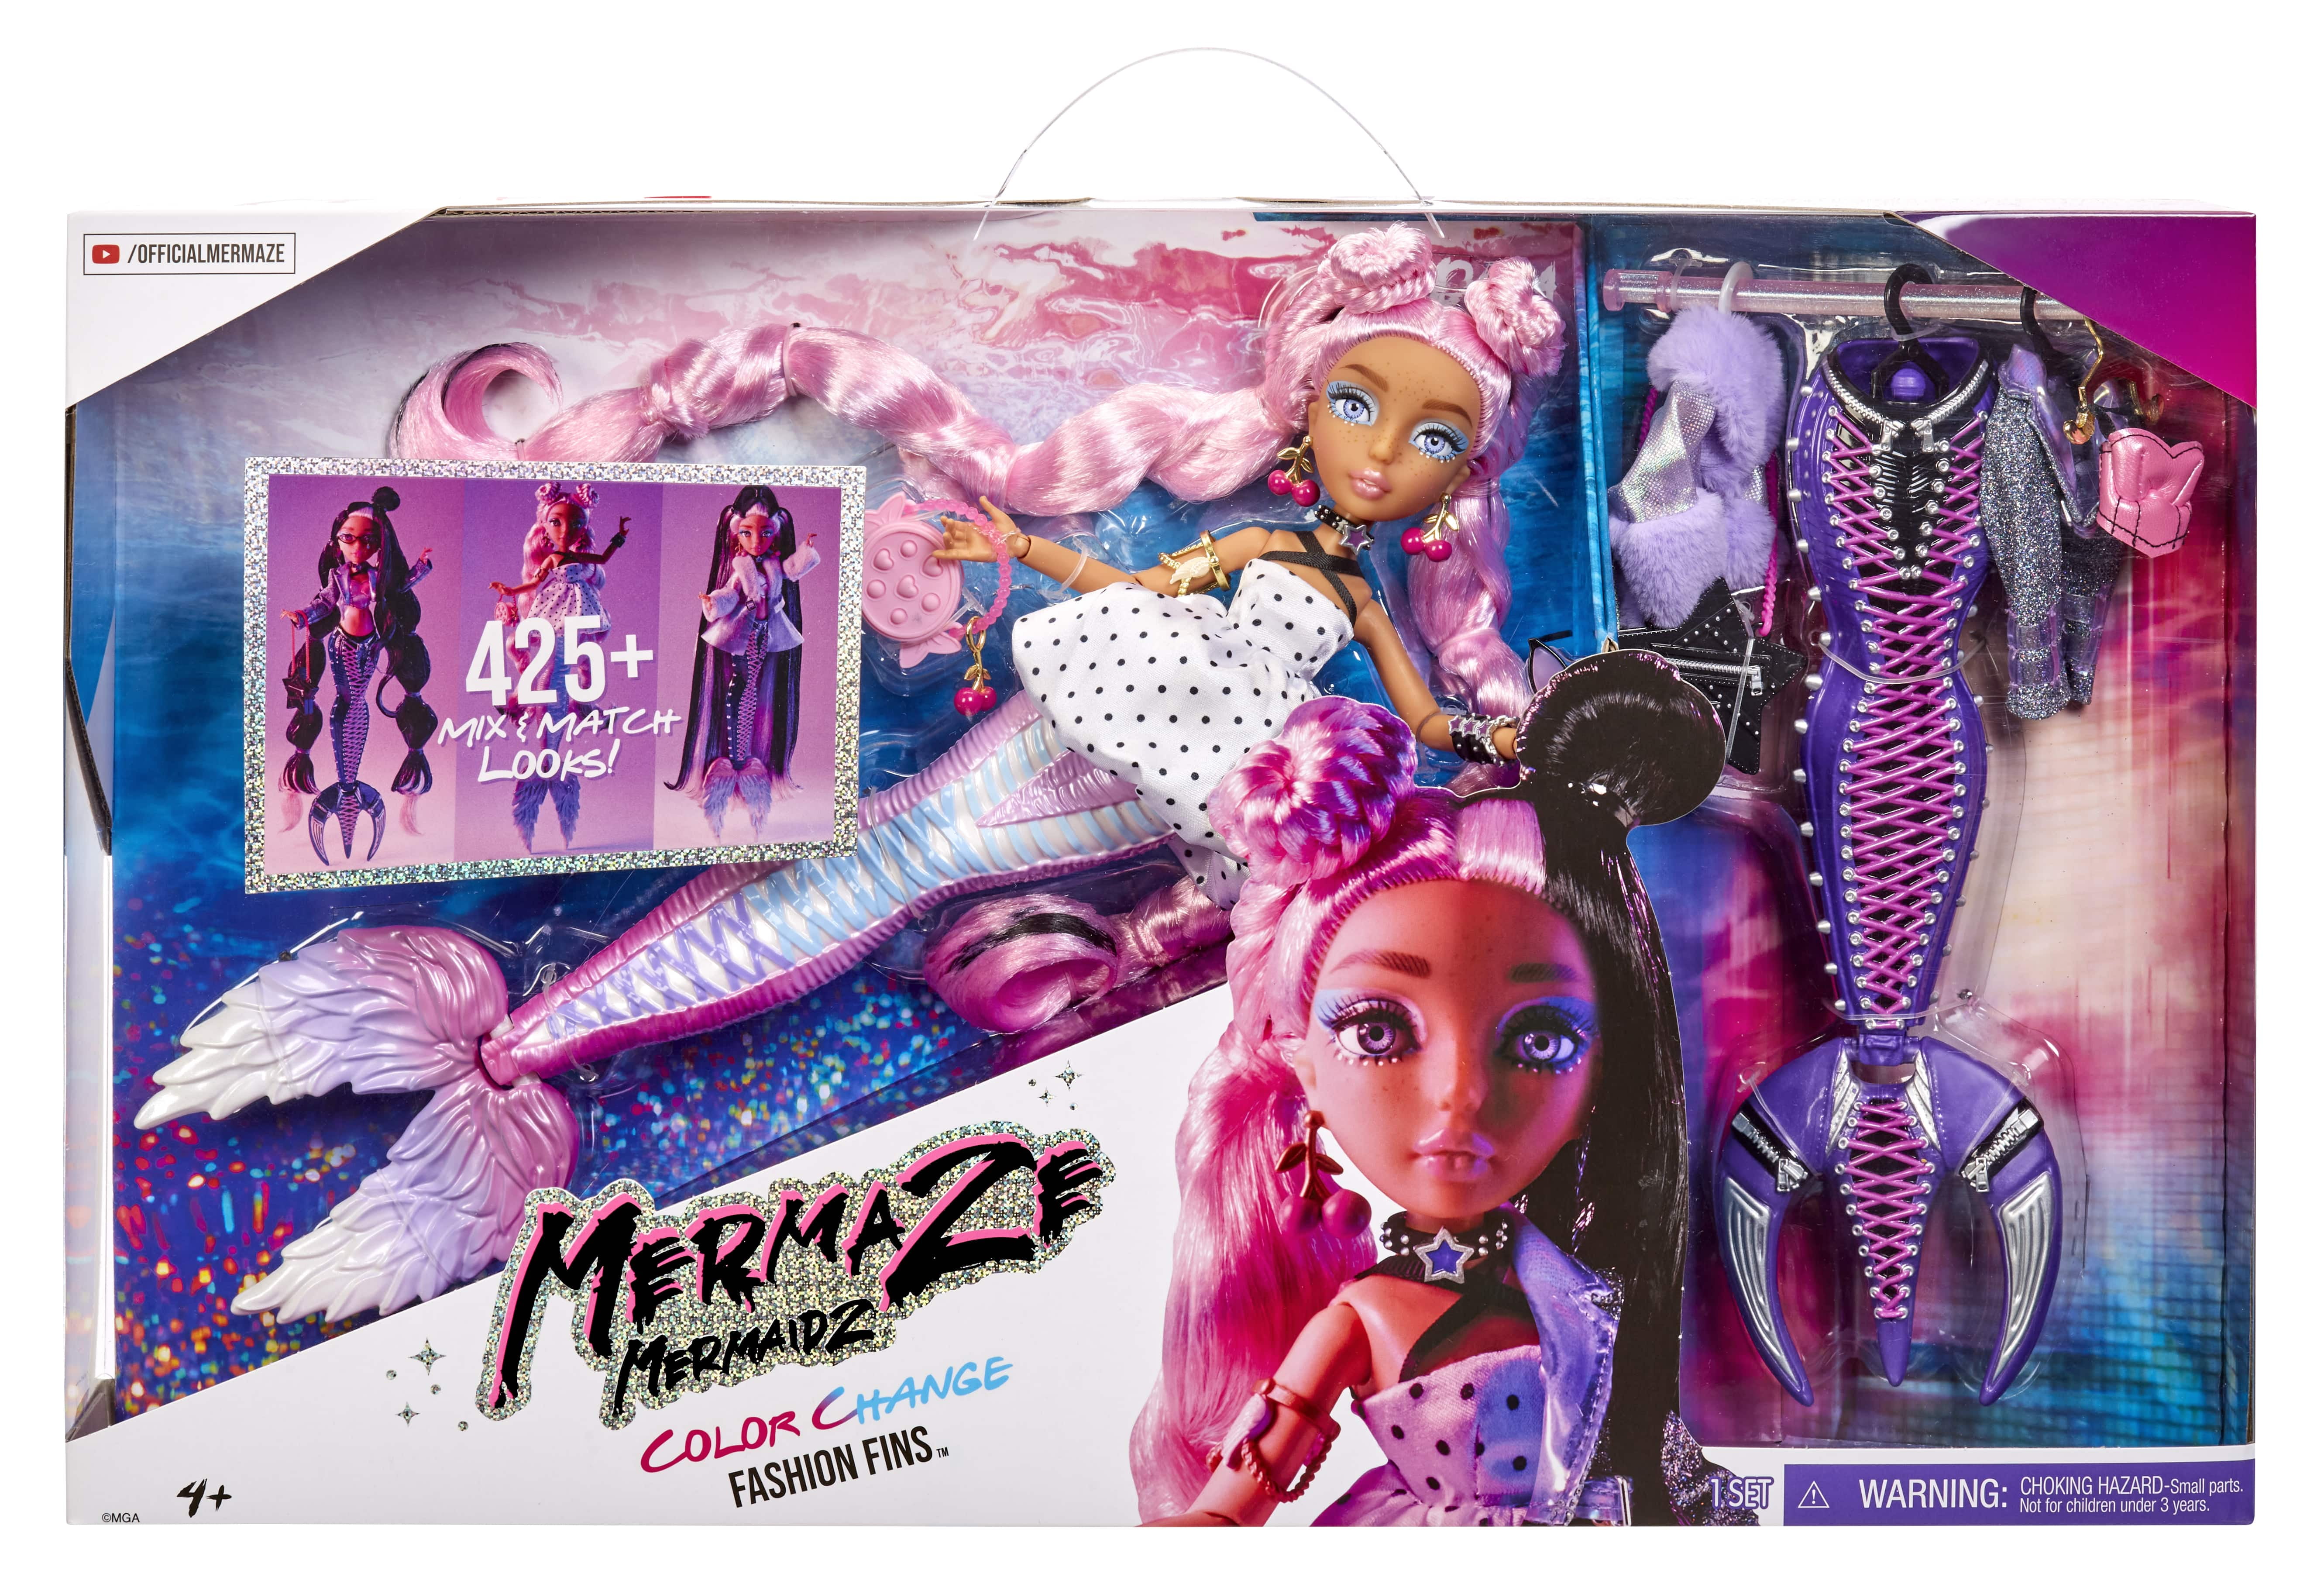 Mermaze Mermaidz Fashion Fins Morra Customizable Fashion Doll with Mix & Match Tails, Color Change Fin and Makeup, Surprise Hair Color